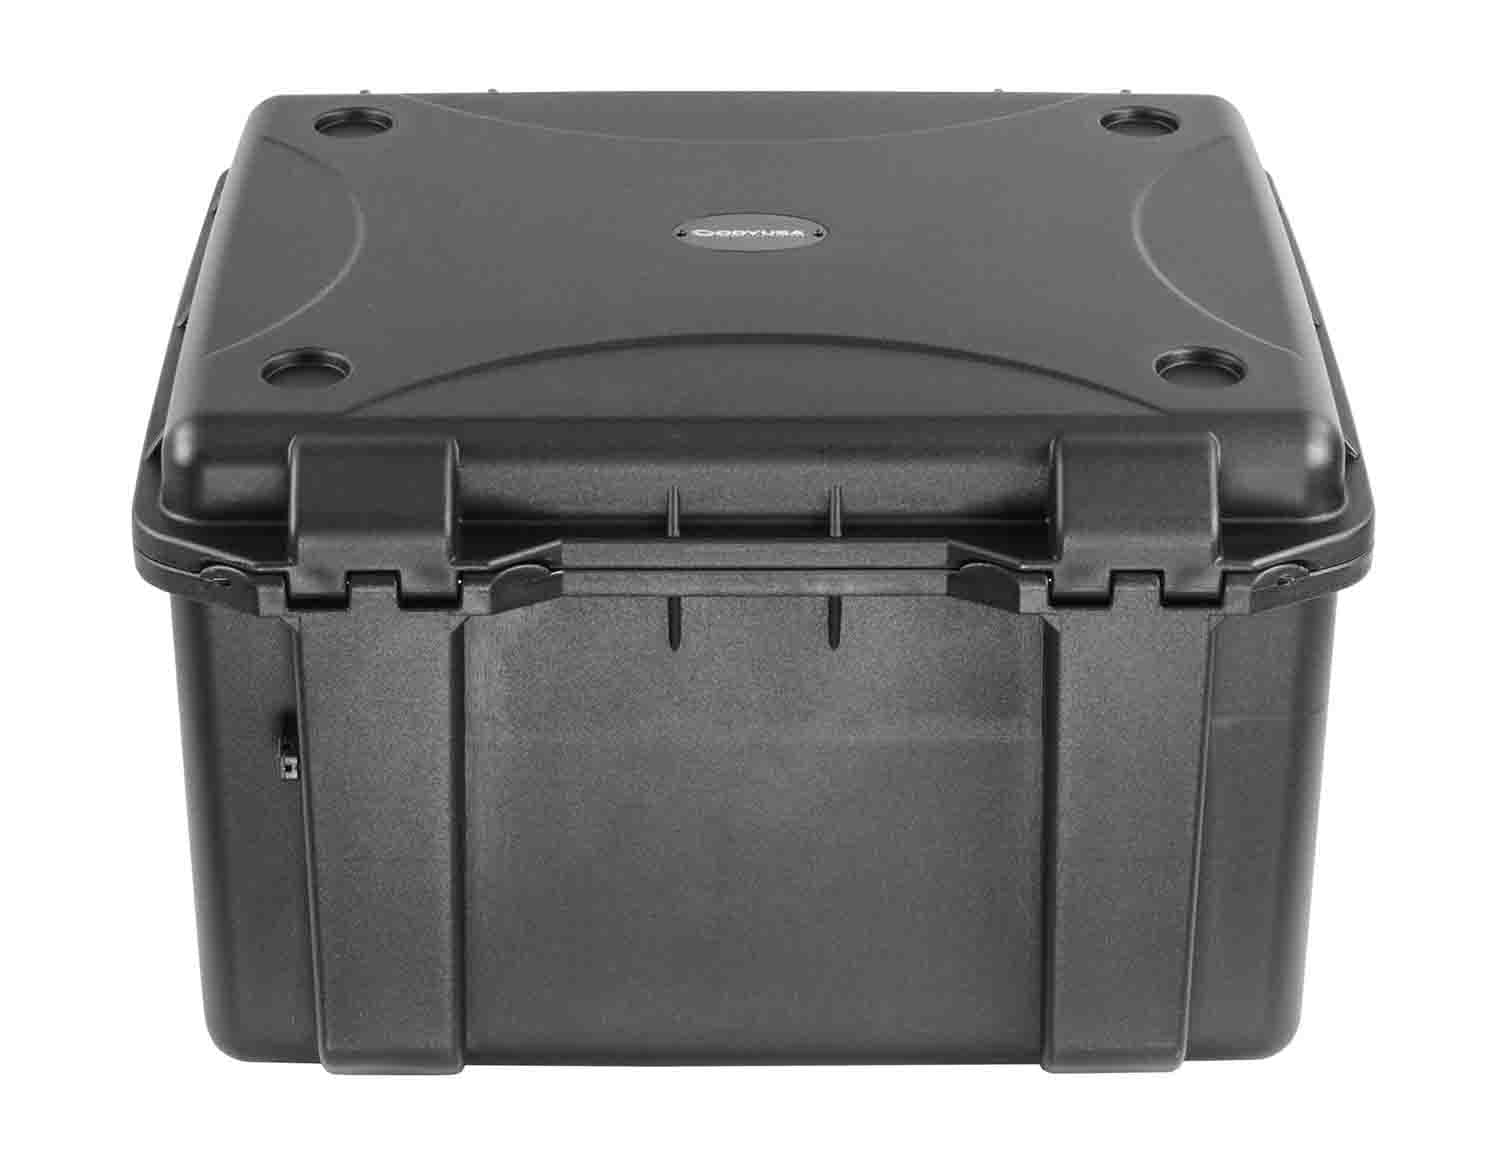 Odyssey VU161310, 17″ x 13.25″ x 8.75-Inches Bottom Interior with Pluck Foams Injection-Molded Utility Case - Hollywood DJ